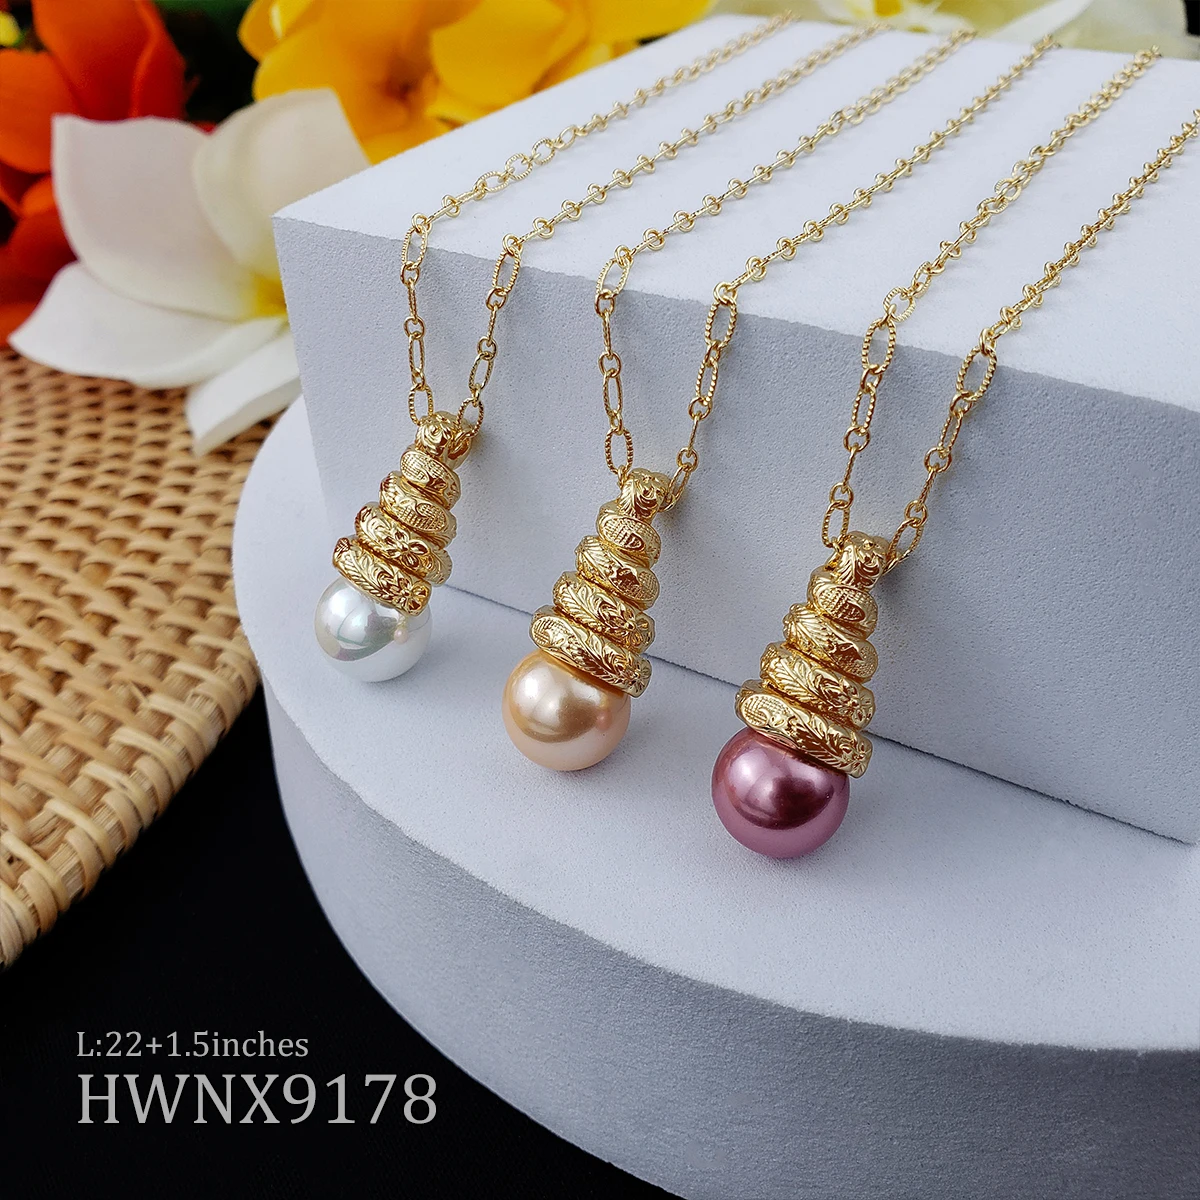 

Screw plumeria flower necklace pendant and stud pearl earrings set hawaiian 14k gold jewelry sets wholesale for women, Customized color